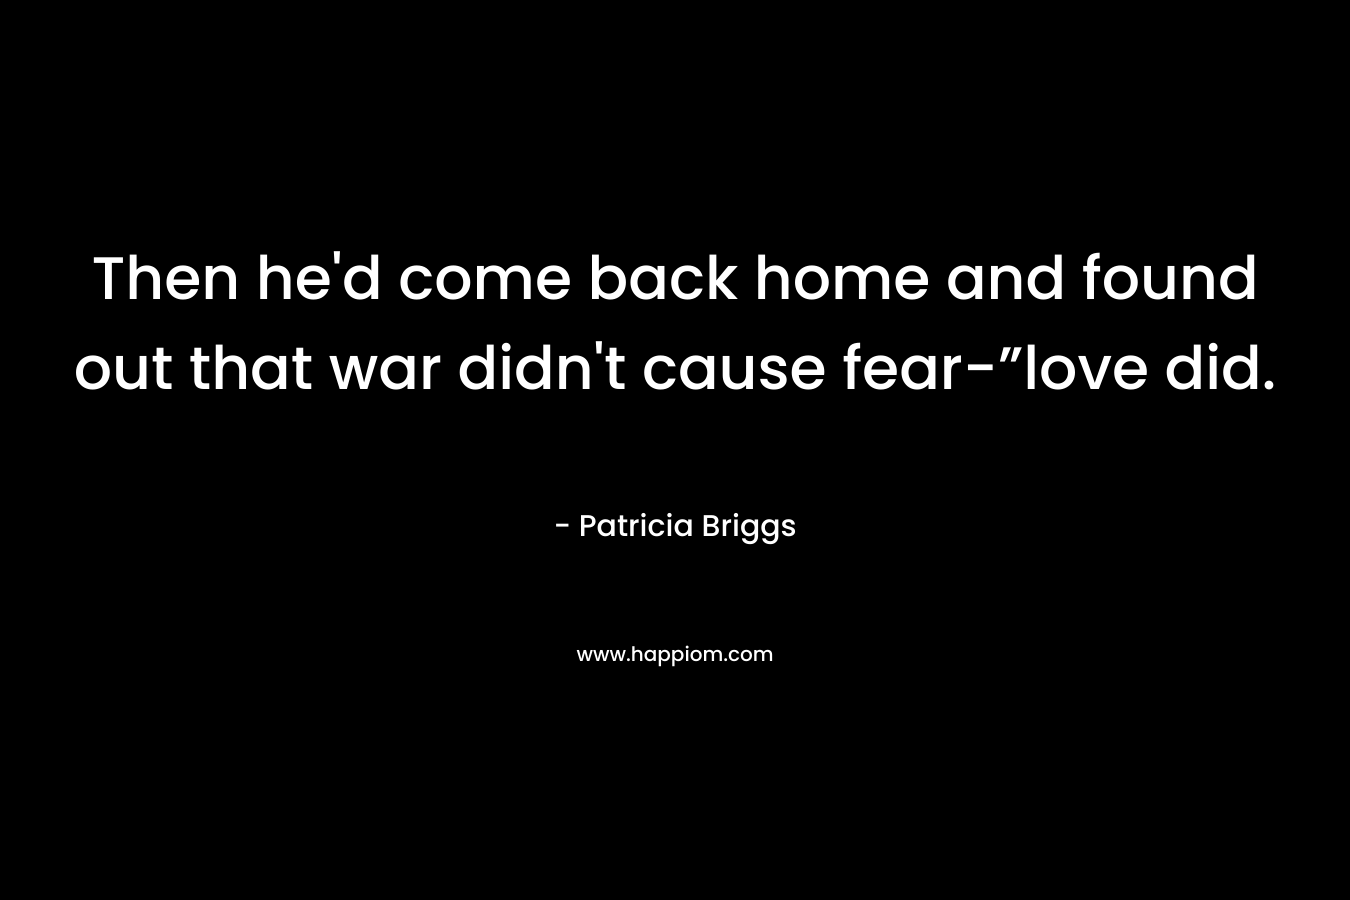 Then he'd come back home and found out that war didn't cause fear-”love did.